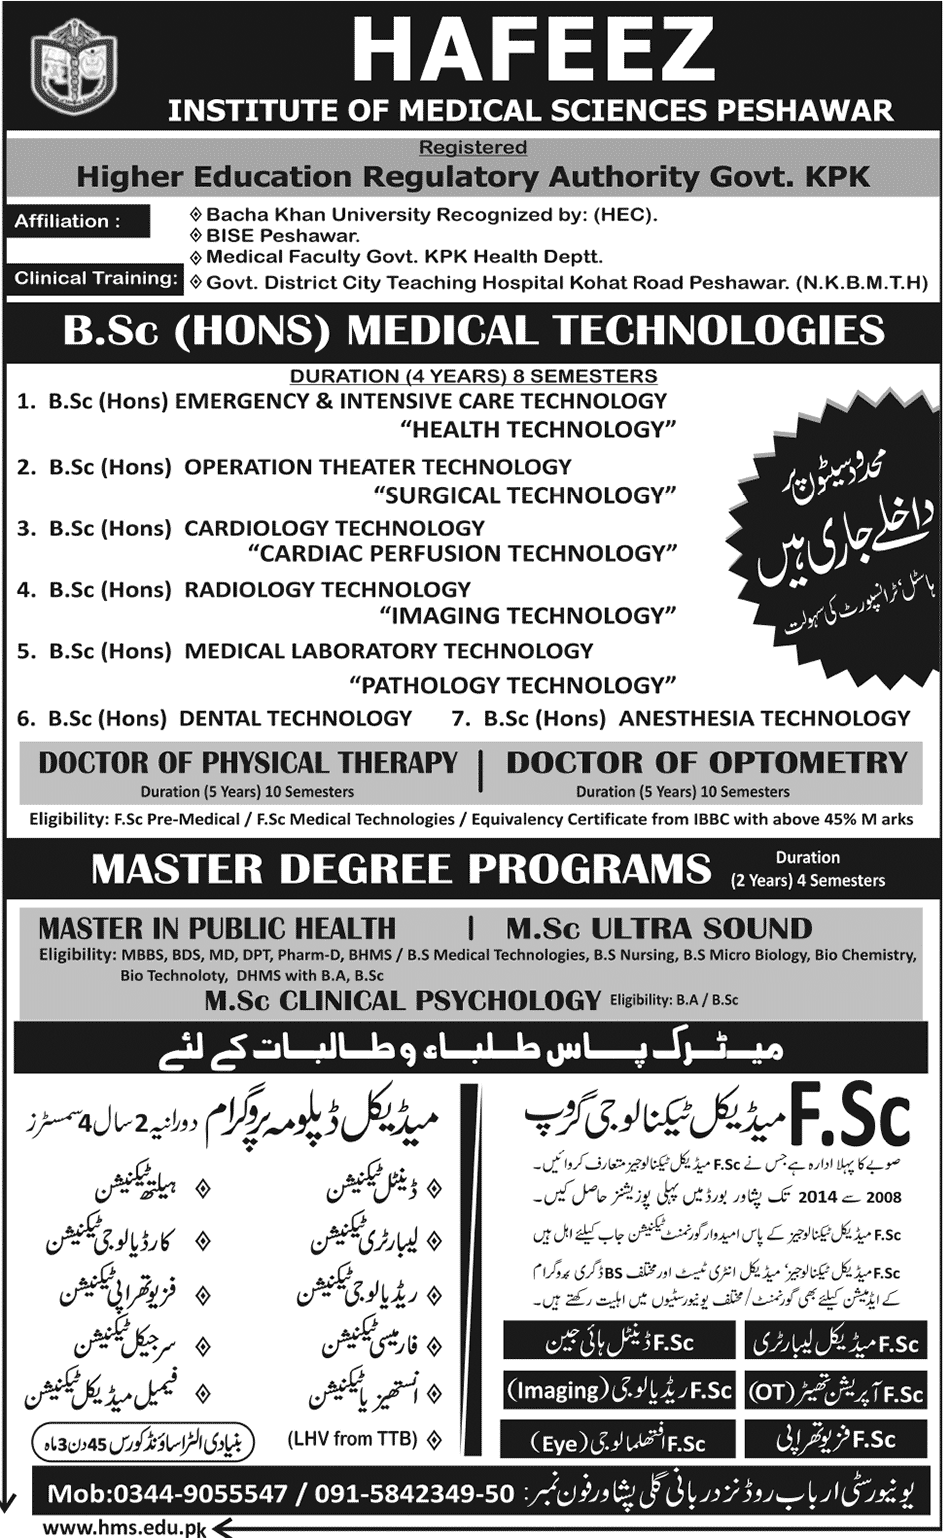 Hafeez Institute of Medical Sciences Peshawar Admission Notice 2014-2015 for B.Sc (Hons) Emergency & Intensive Care Technology, B.Sc (Hons) Operation Theater Technology, B.Sc (Hons) Cardiology Technology, B.Sc (Hons) Radiology Technology, B.Sc (Hons) Medical laboratory Technology, B.Sc (Hons) Dental Technology, B.Sc (Hons) Anesthesia Technology, Doctor of Physical Therapy (DPT),  Doctor of Optometry (DO)